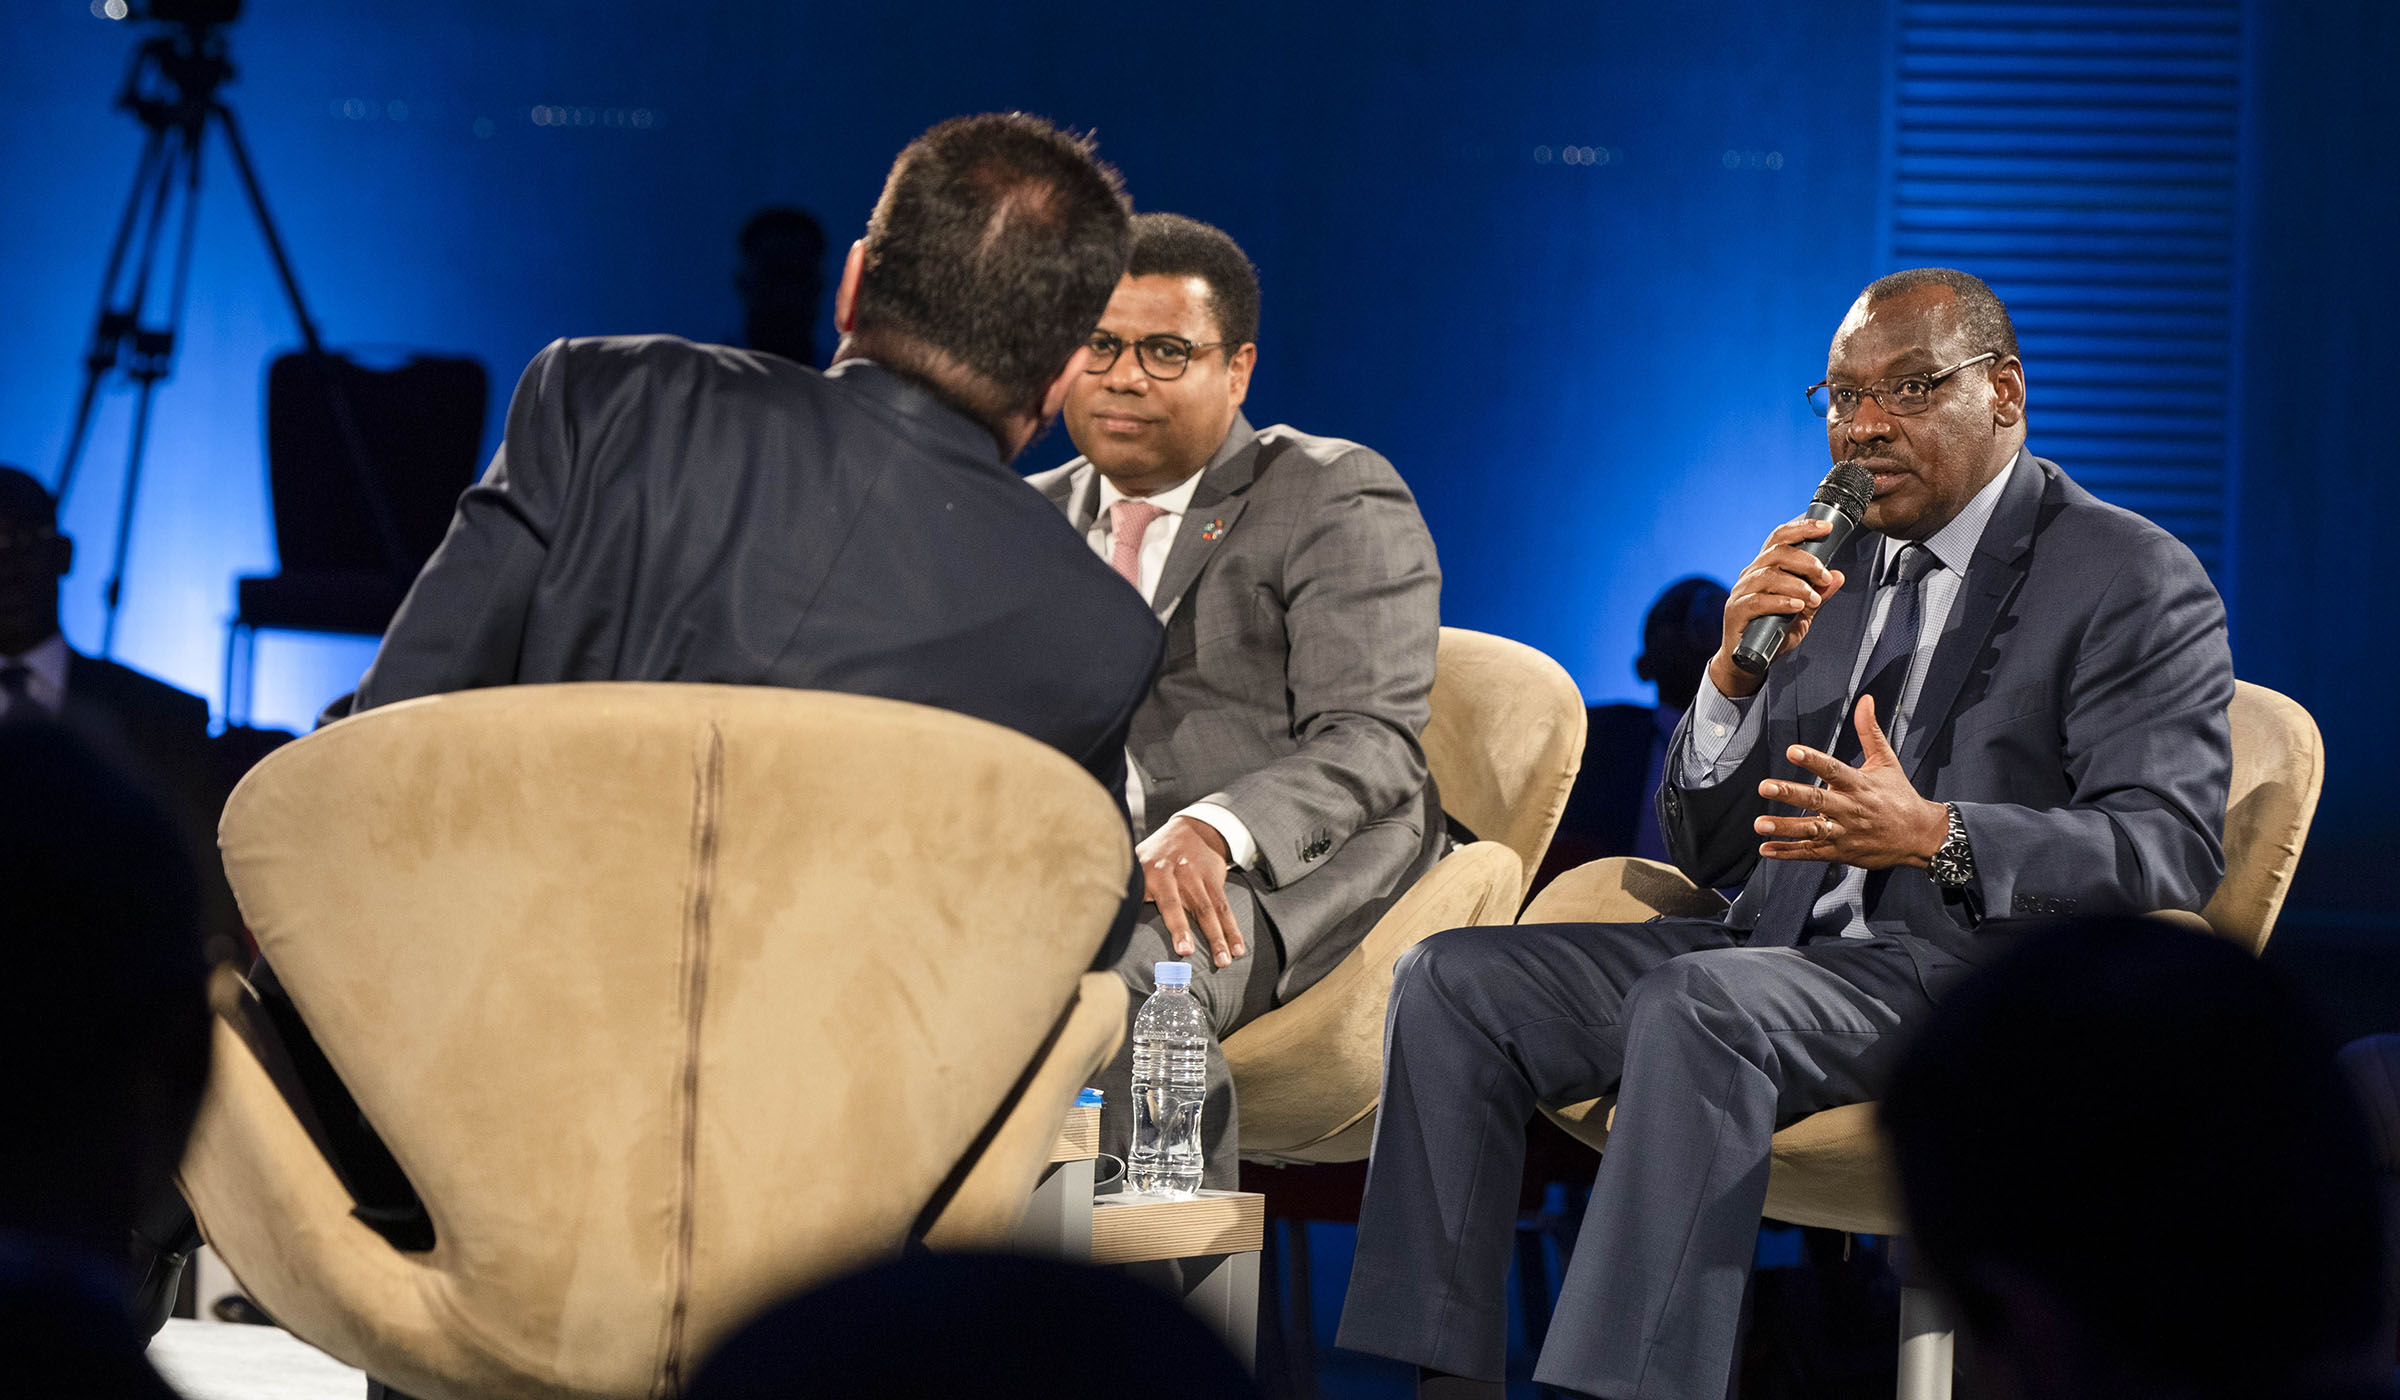 Gatete (right) speaks on a panel during the Africa CEO Forum 2019 in Kigali on March 26, 2019. Emmanuel Kwizera.